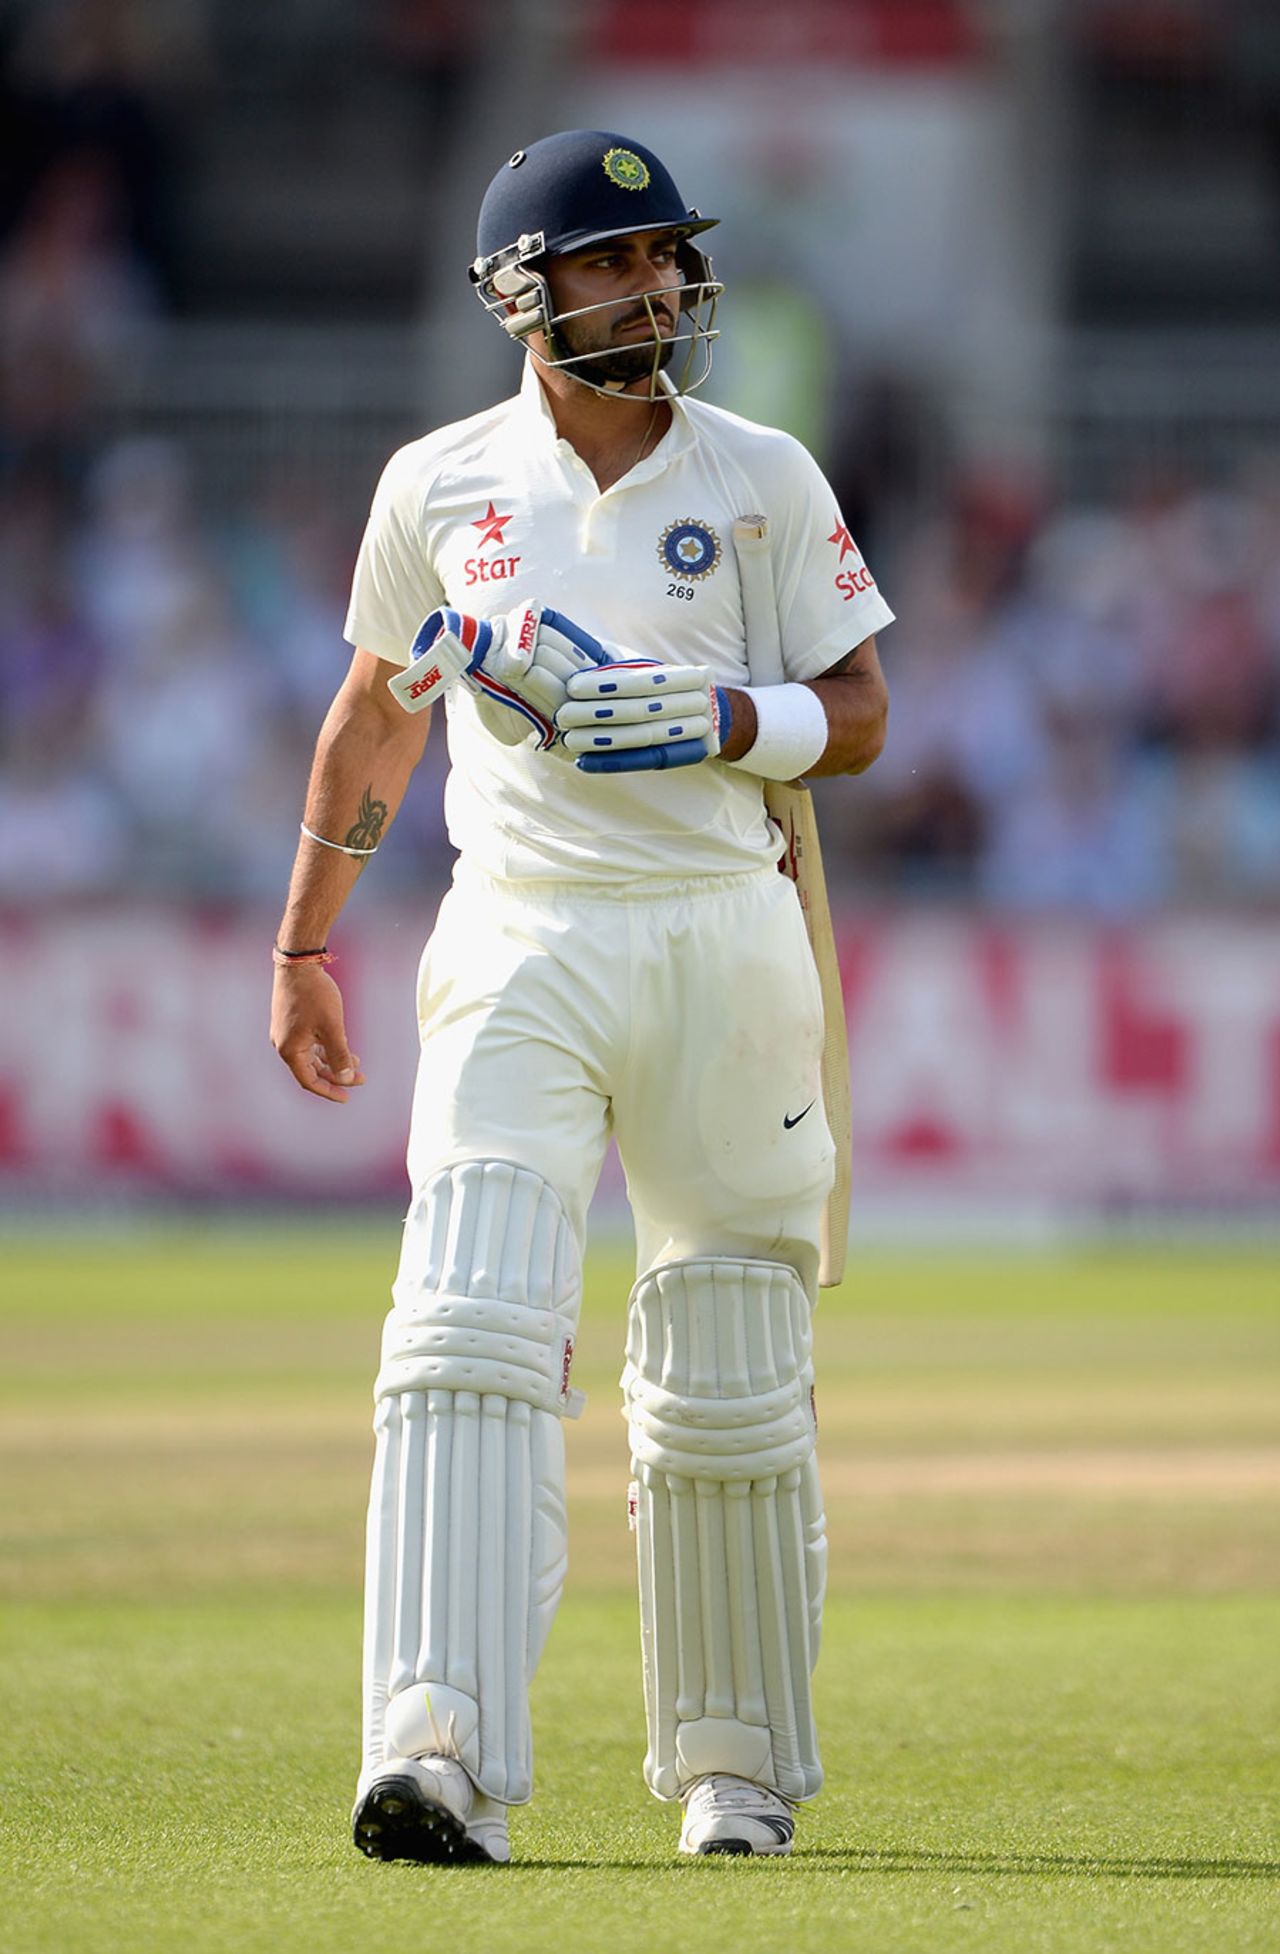 Virat Kohli was sent packing by James Anderson yet again, England v India, 4th Test, Old Trafford, 3rd day, August 9, 2014